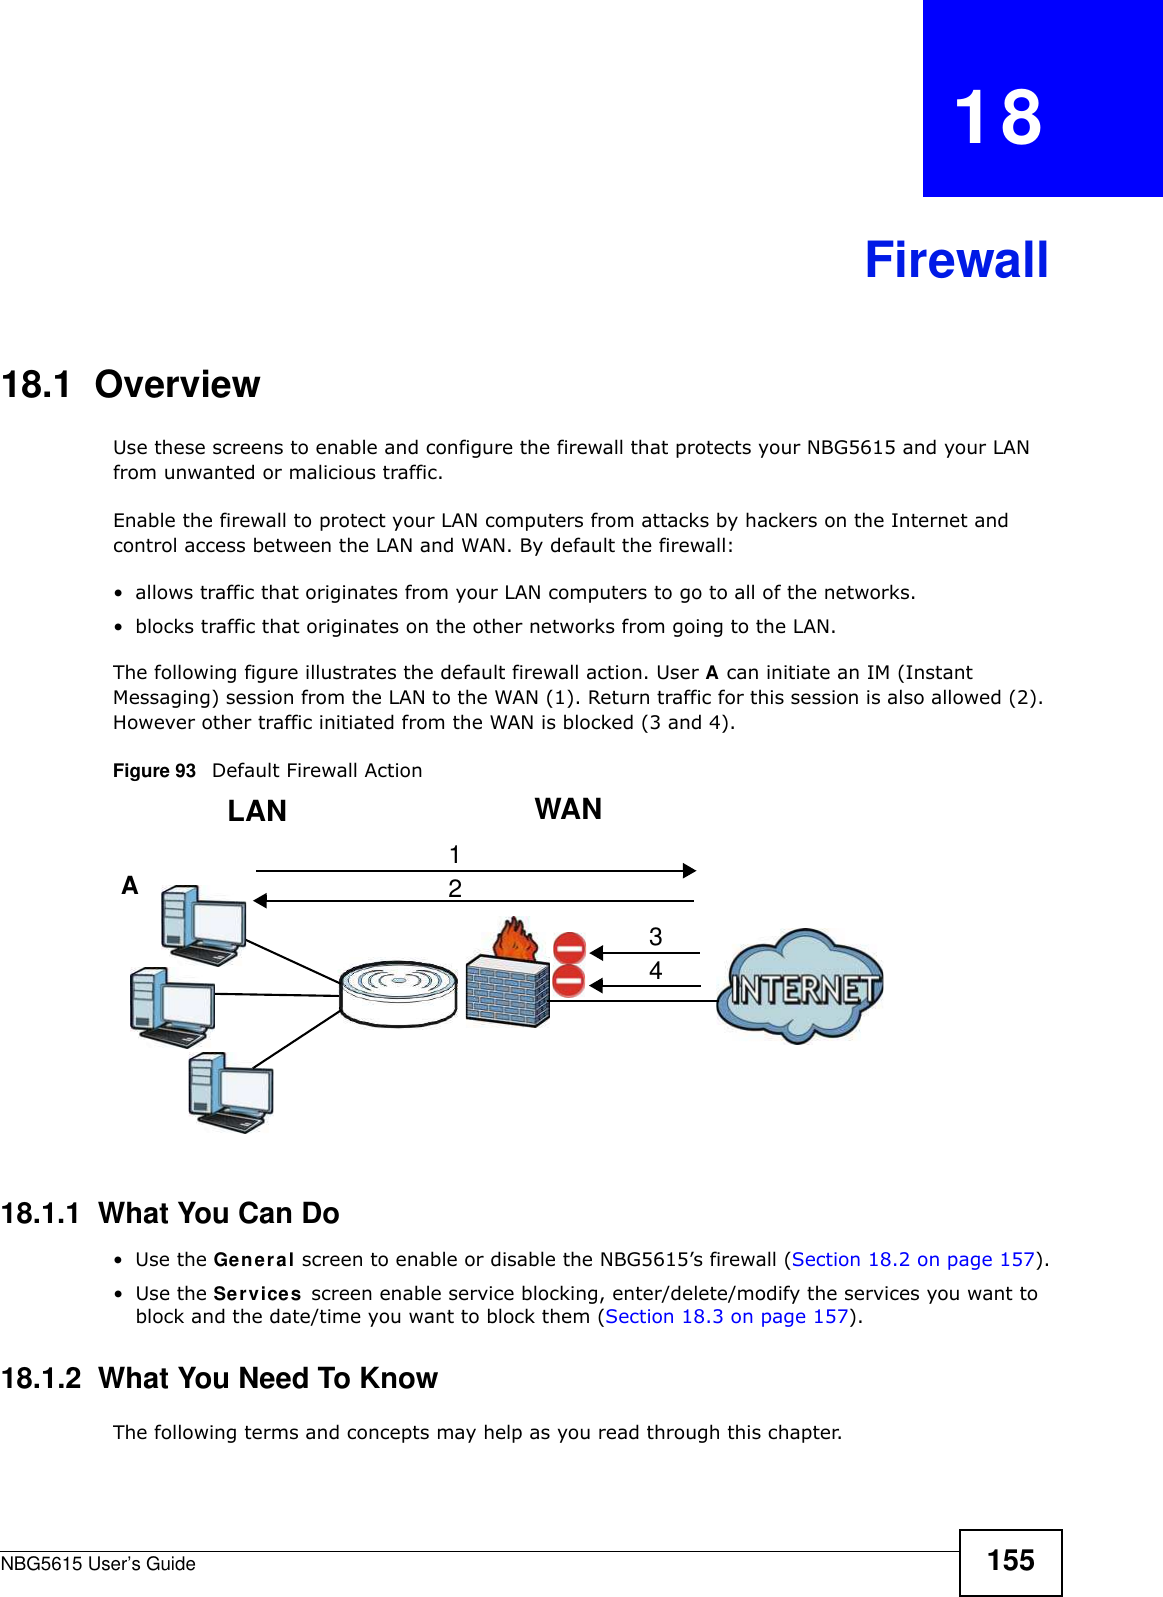 NBG5615 User’s Guide 155CHAPTER   18Firewall18.1  Overview   Use these screens to enable and configure the firewall that protects your NBG5615 and your LAN from unwanted or malicious traffic.Enable the firewall to protect your LAN computers from attacks by hackers on the Internet and control access between the LAN and WAN. By default the firewall:• allows traffic that originates from your LAN computers to go to all of the networks. • blocks traffic that originates on the other networks from going to the LAN. The following figure illustrates the default firewall action. User A can initiate an IM (Instant Messaging) session from the LAN to the WAN (1). Return traffic for this session is also allowed (2). However other traffic initiated from the WAN is blocked (3 and 4).Figure 93   Default Firewall Action18.1.1  What You Can Do•Use the General screen to enable or disable the NBG5615’s firewall (Section 18.2 on page 157).•Use the Services screen enable service blocking, enter/delete/modify the services you want to block and the date/time you want to block them (Section 18.3 on page 157).18.1.2  What You Need To KnowThe following terms and concepts may help as you read through this chapter.WANLAN3412A